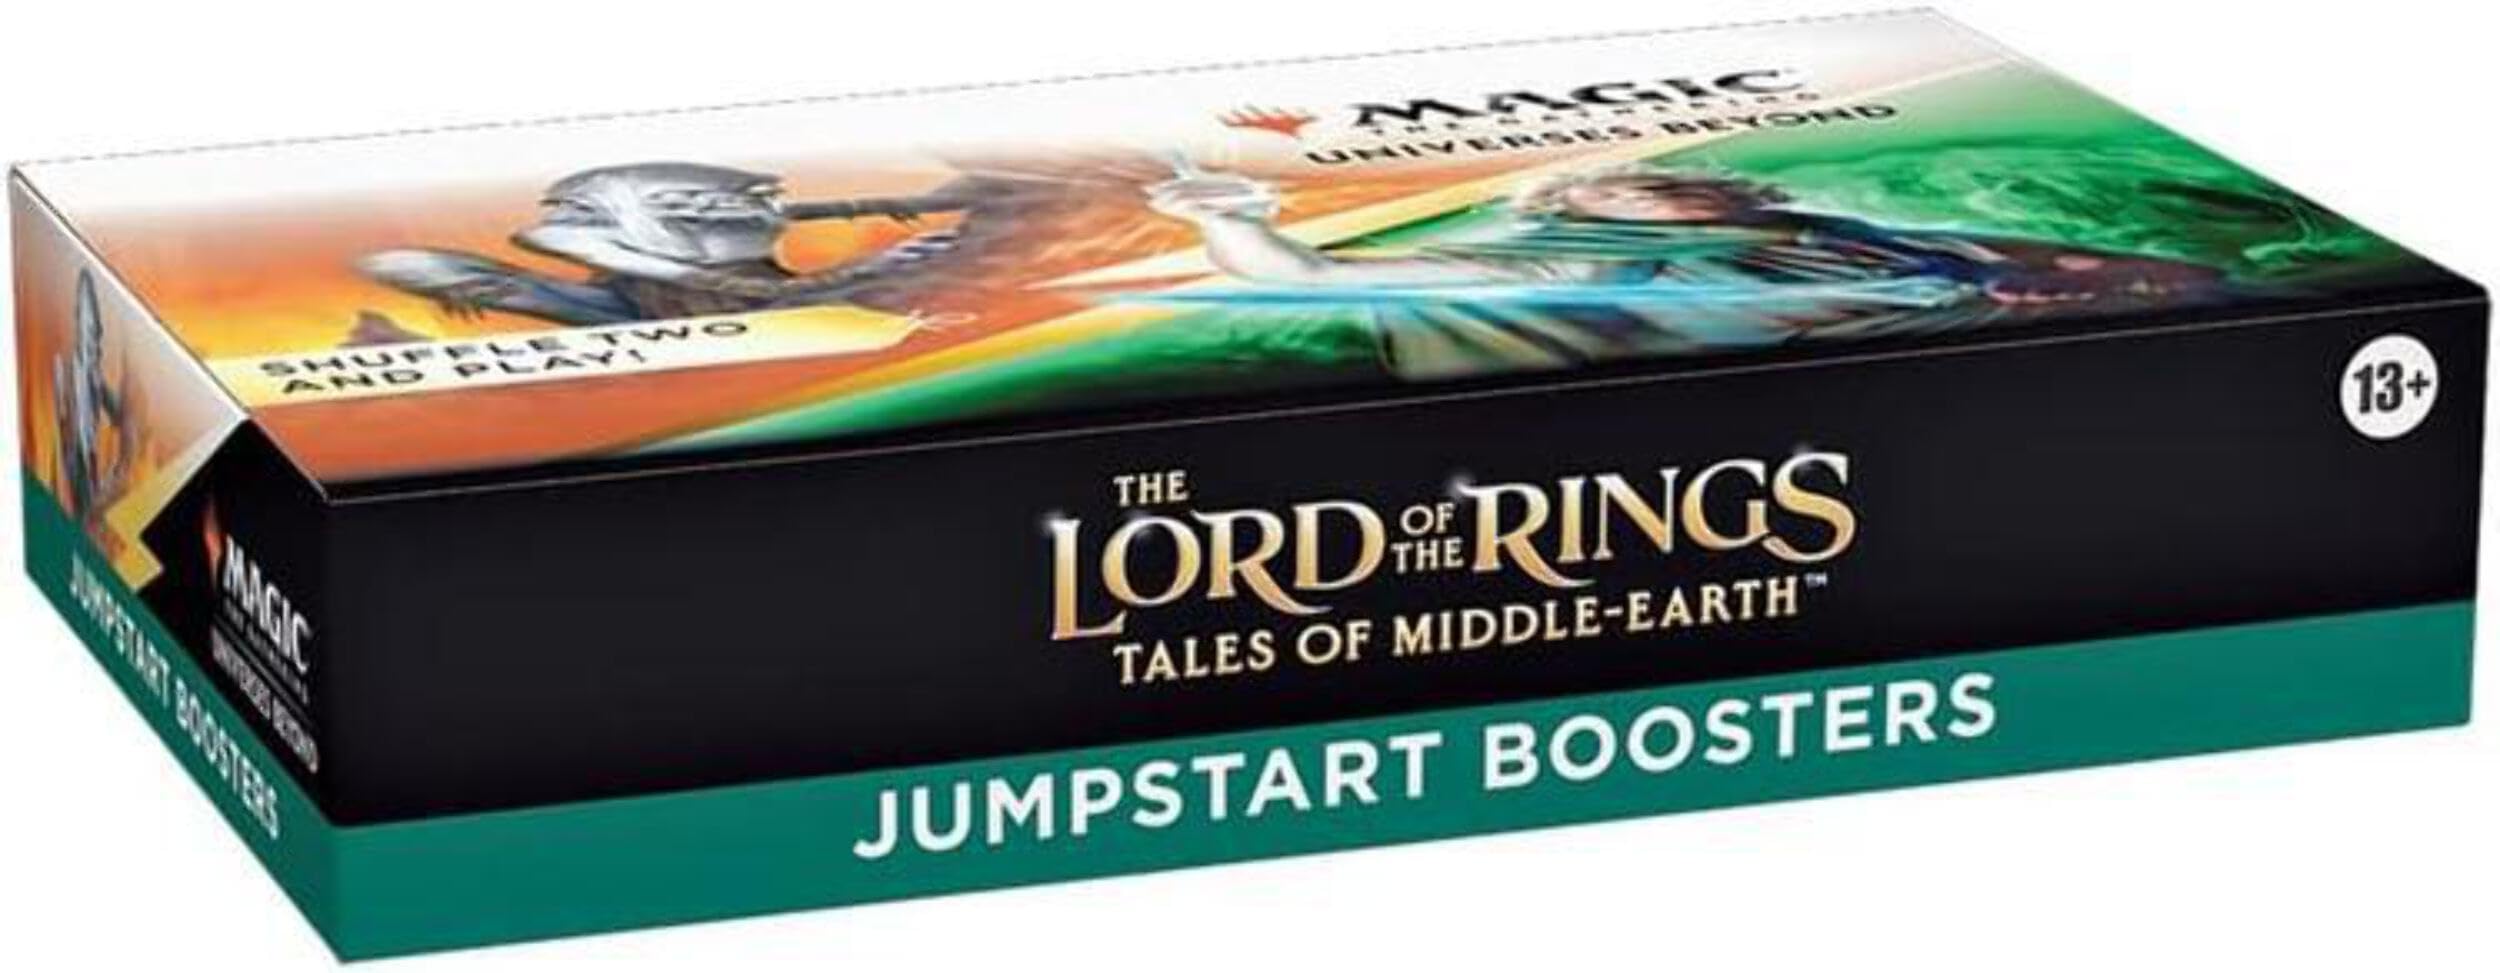 Magic: The Gathering - Lord of the Rings: Tales of Middle-earth Jumpstart Booster (1 PACK)